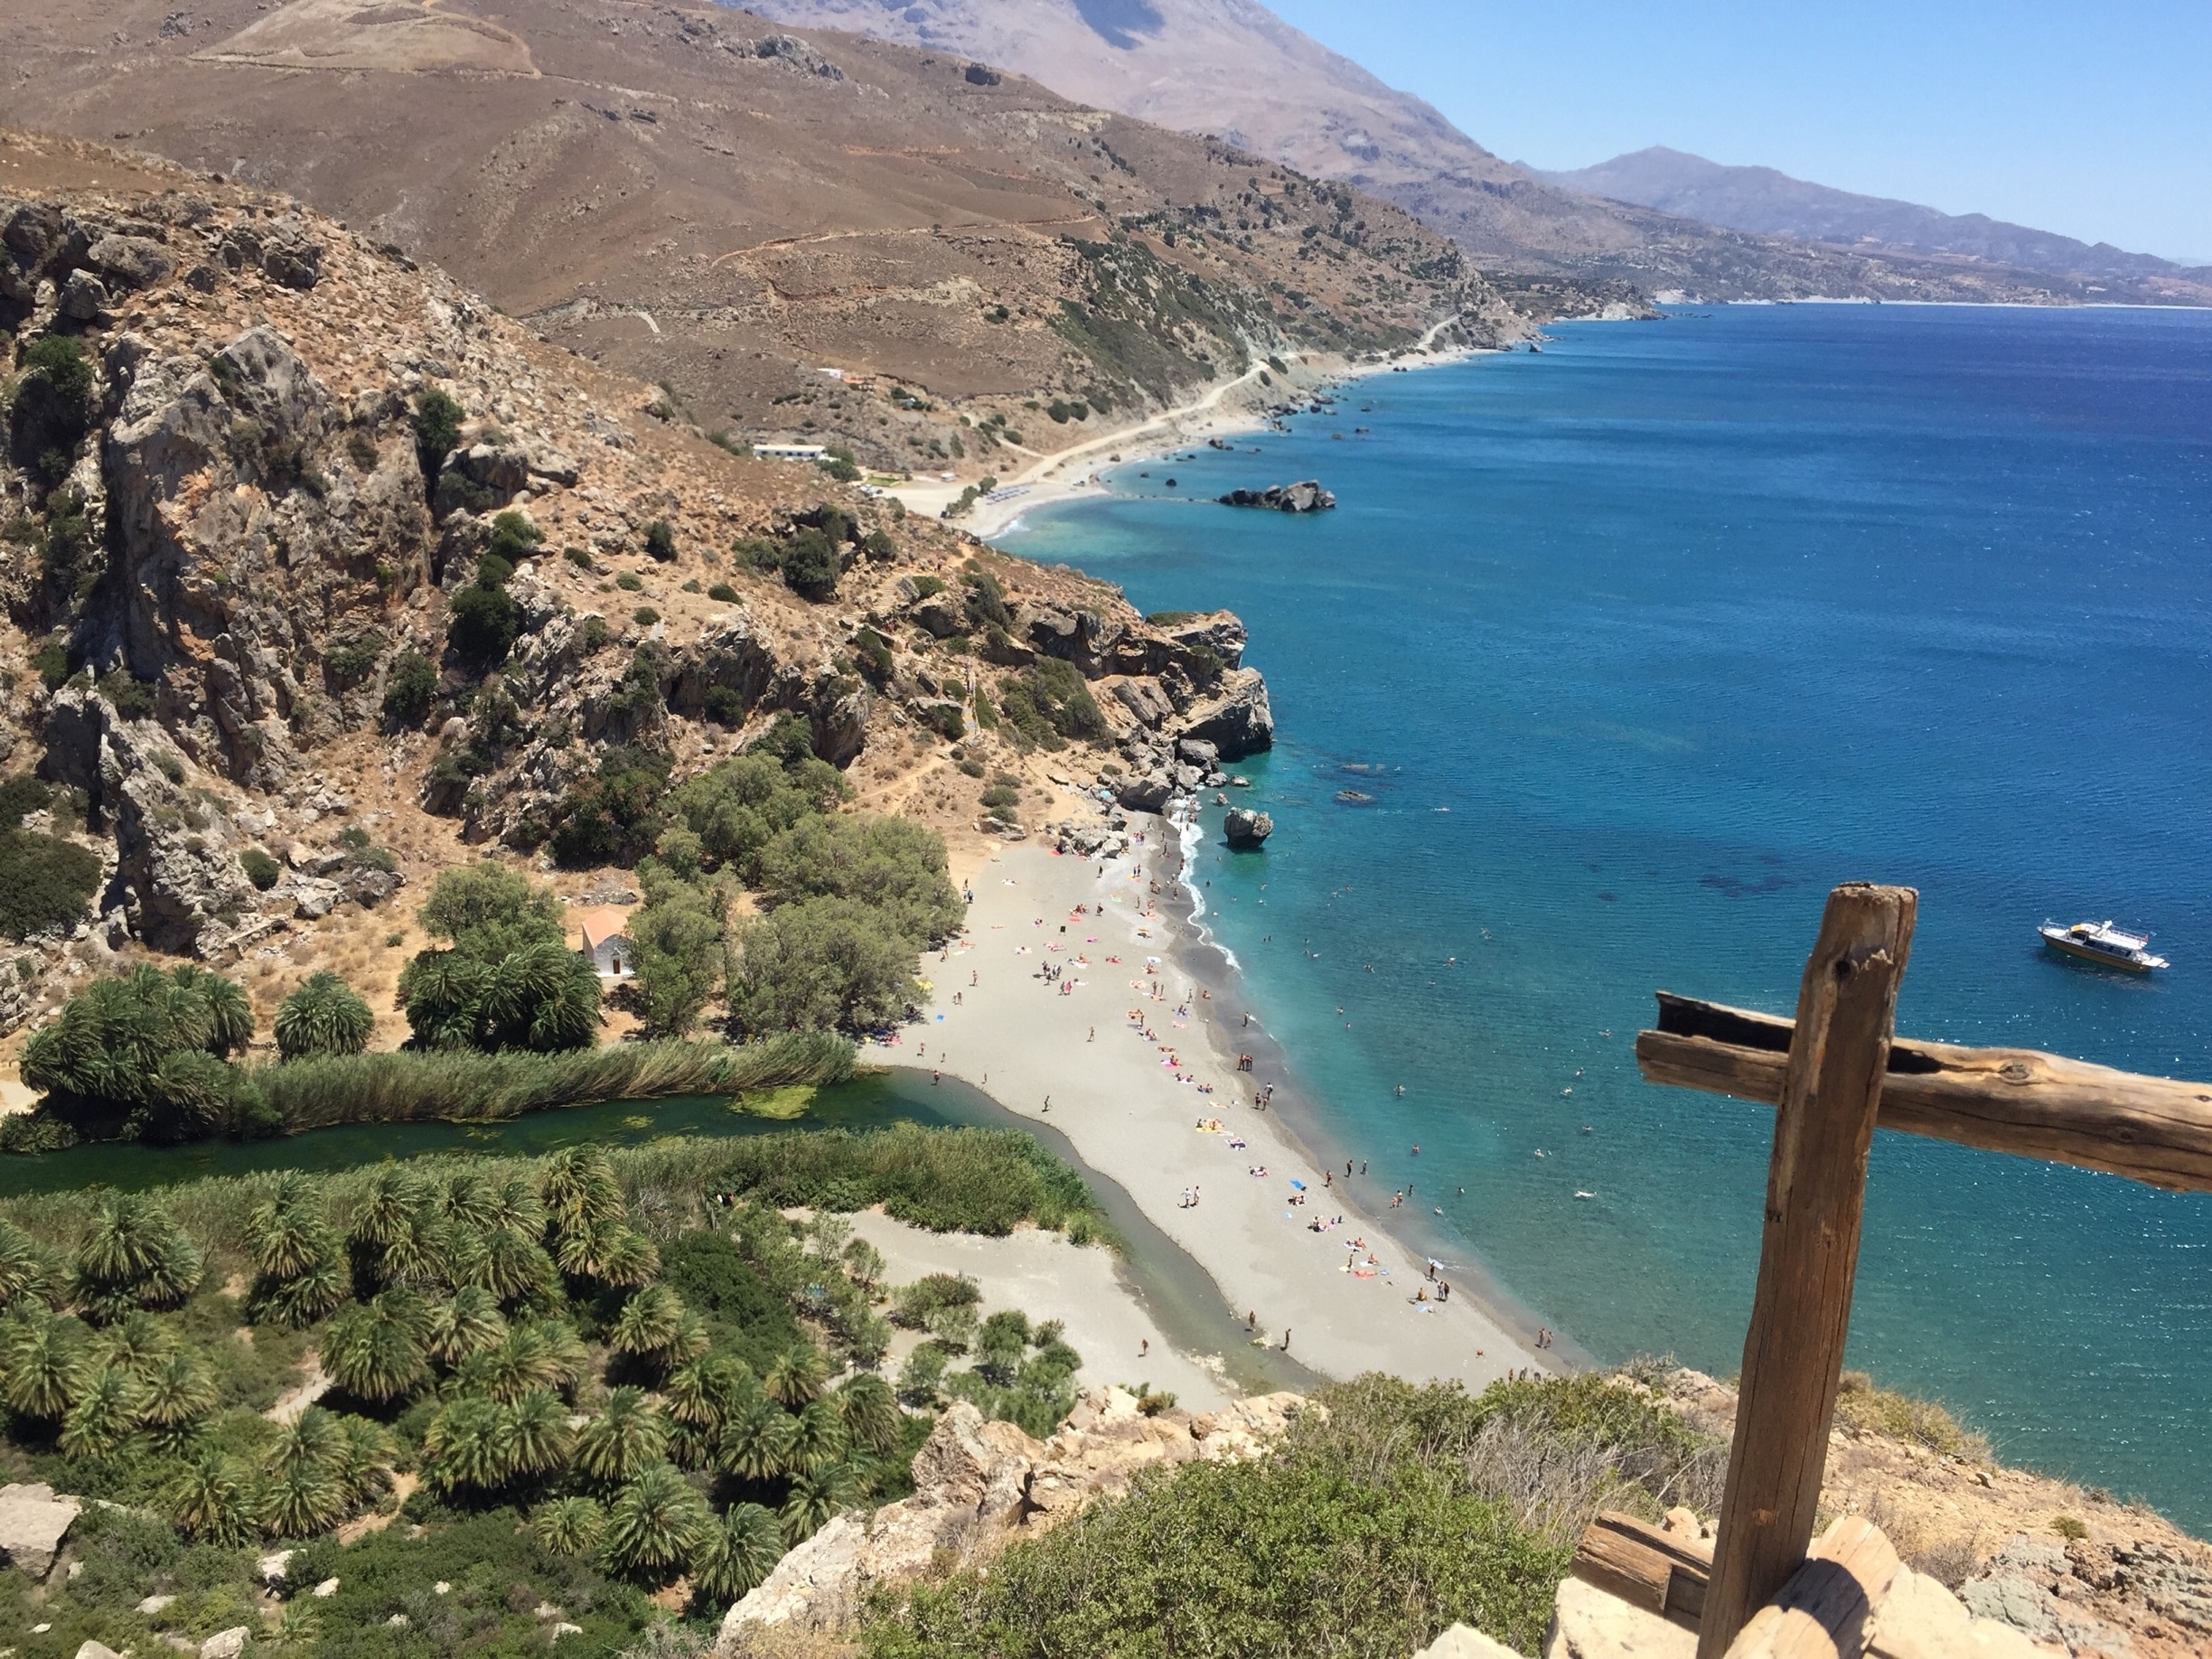 Beautiful Preveli Beach is located at the edge of Kourtaliotikos Gorge near Plakias at the South Coast of Crete, Greece. We walked down the steep path from Preveli Monastery (which is also worth a visit ⛪️) with this magnificent view 🌴 The other way to reach the beach is by boat. You can walk into the palm grove on both sides of the river.
#green